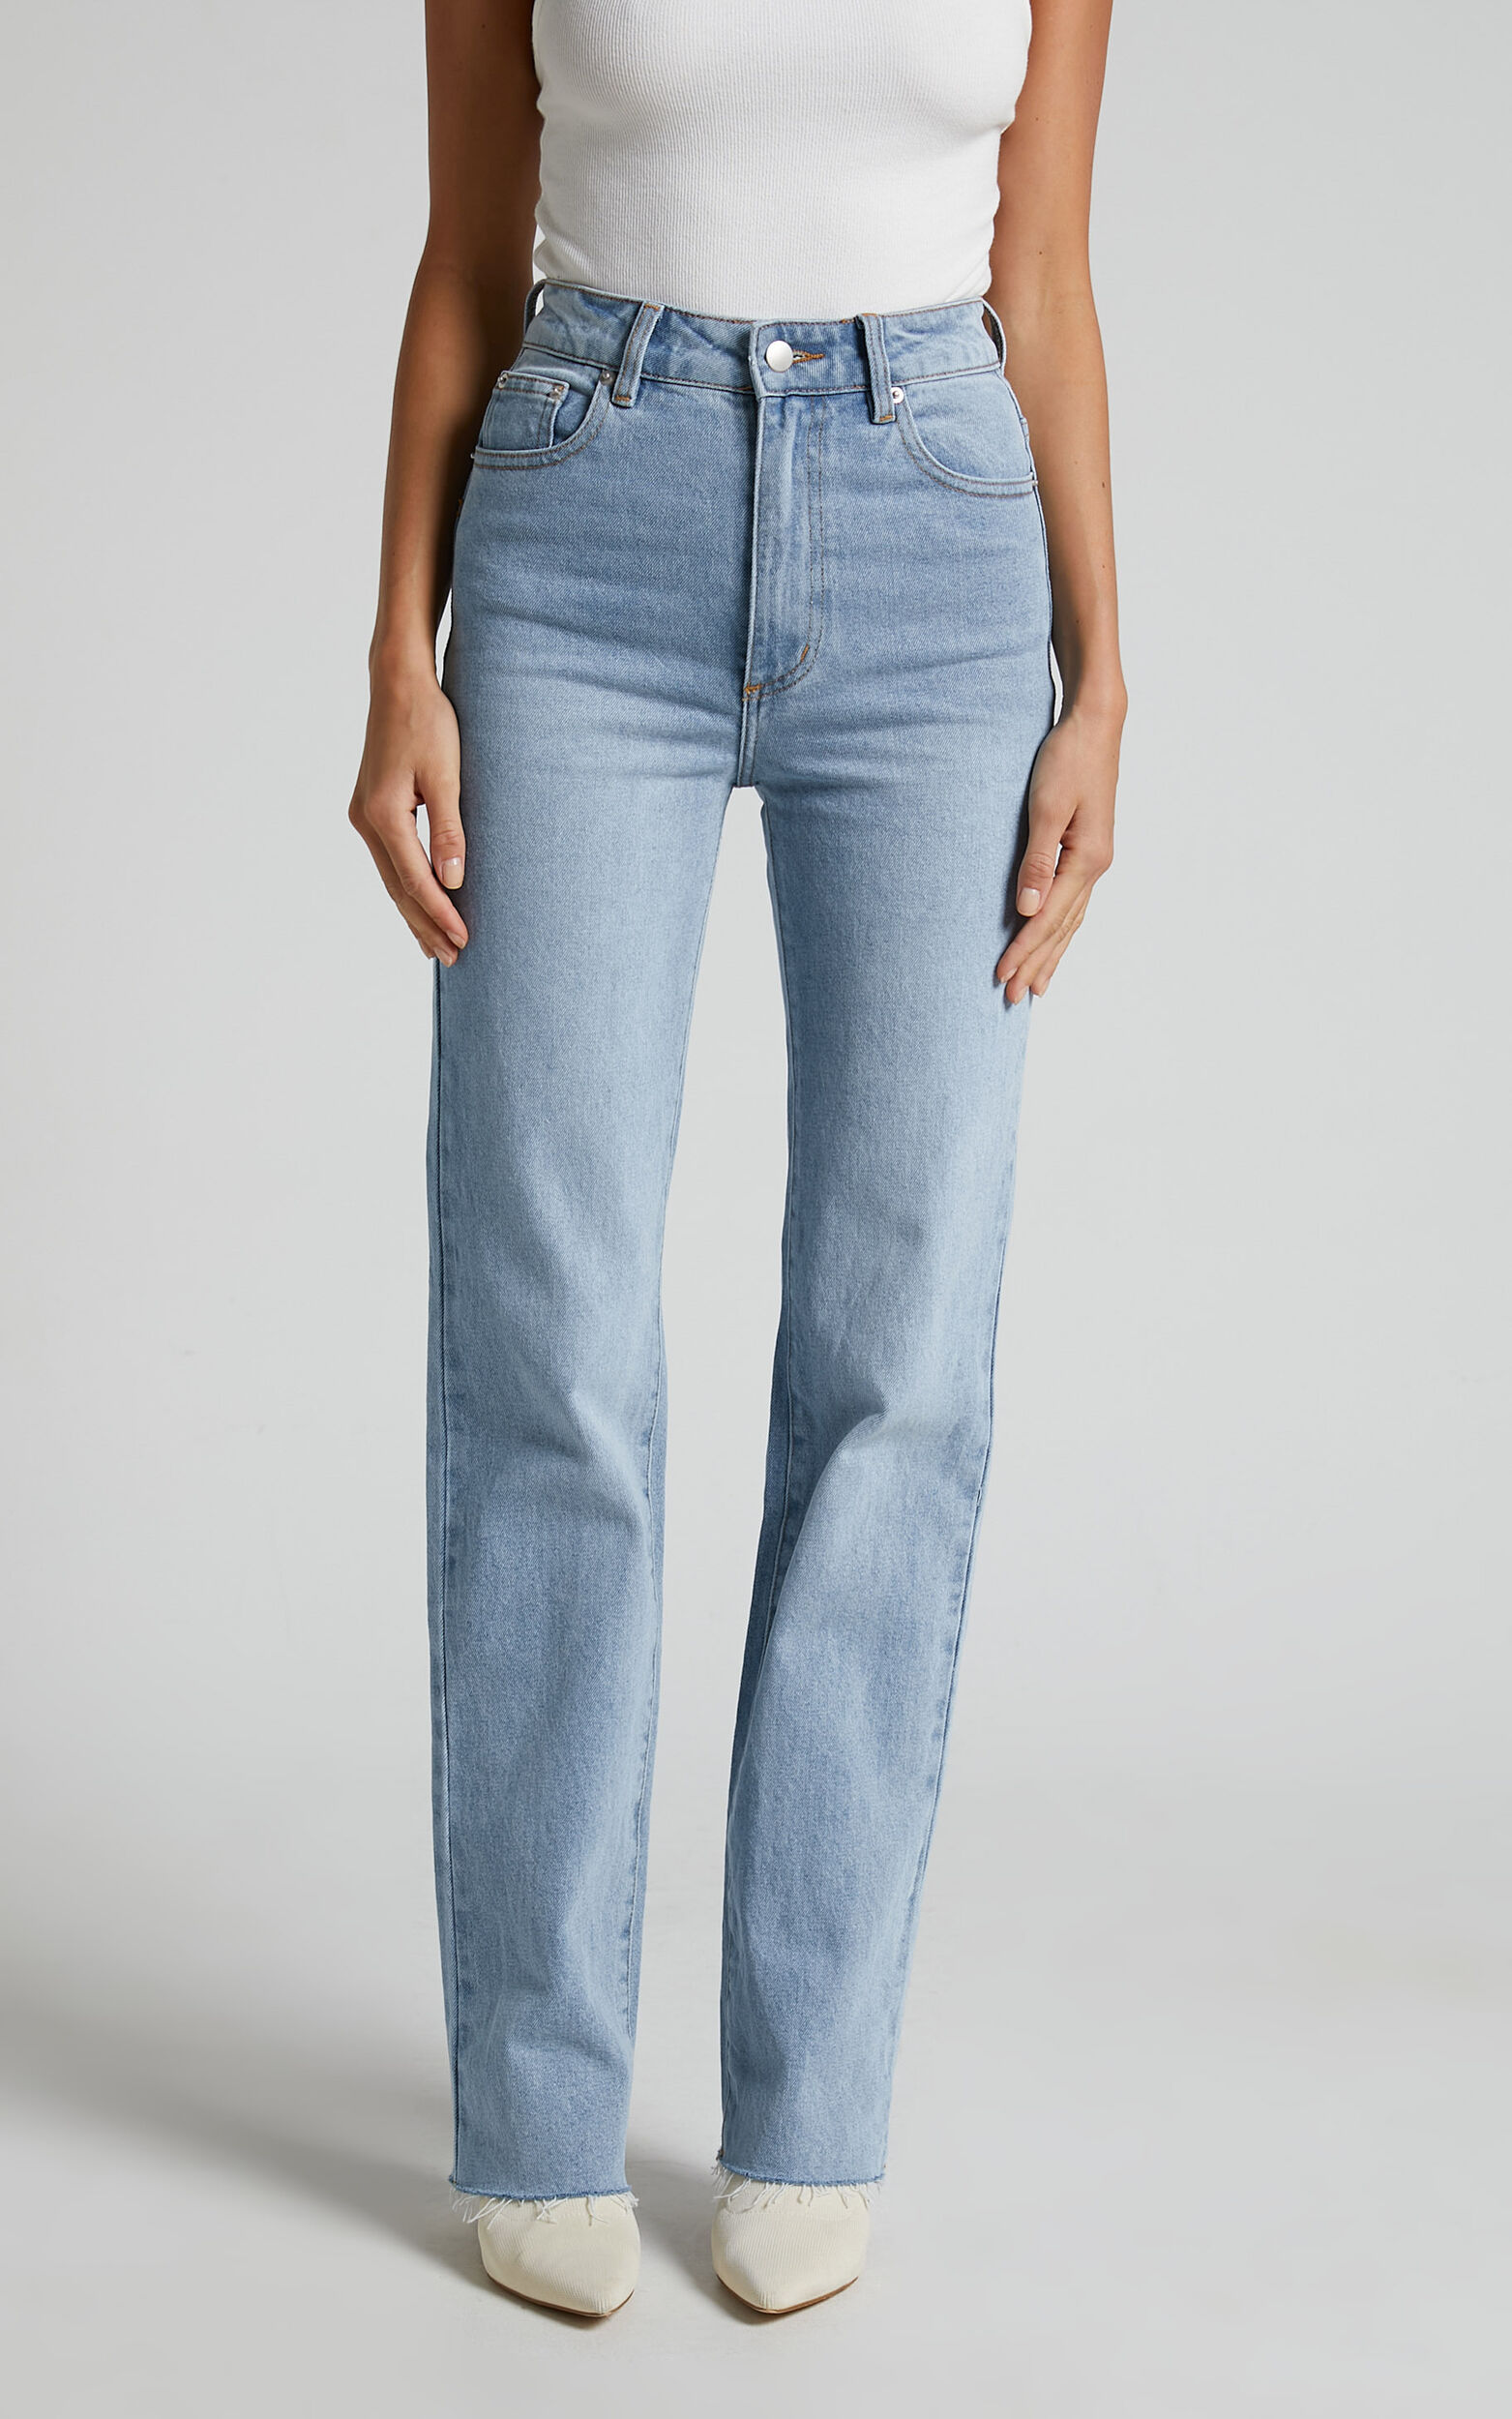 Dexter Jeans - High Waisted Straight Leg Denim Jeans in Mid Blue Wash ...